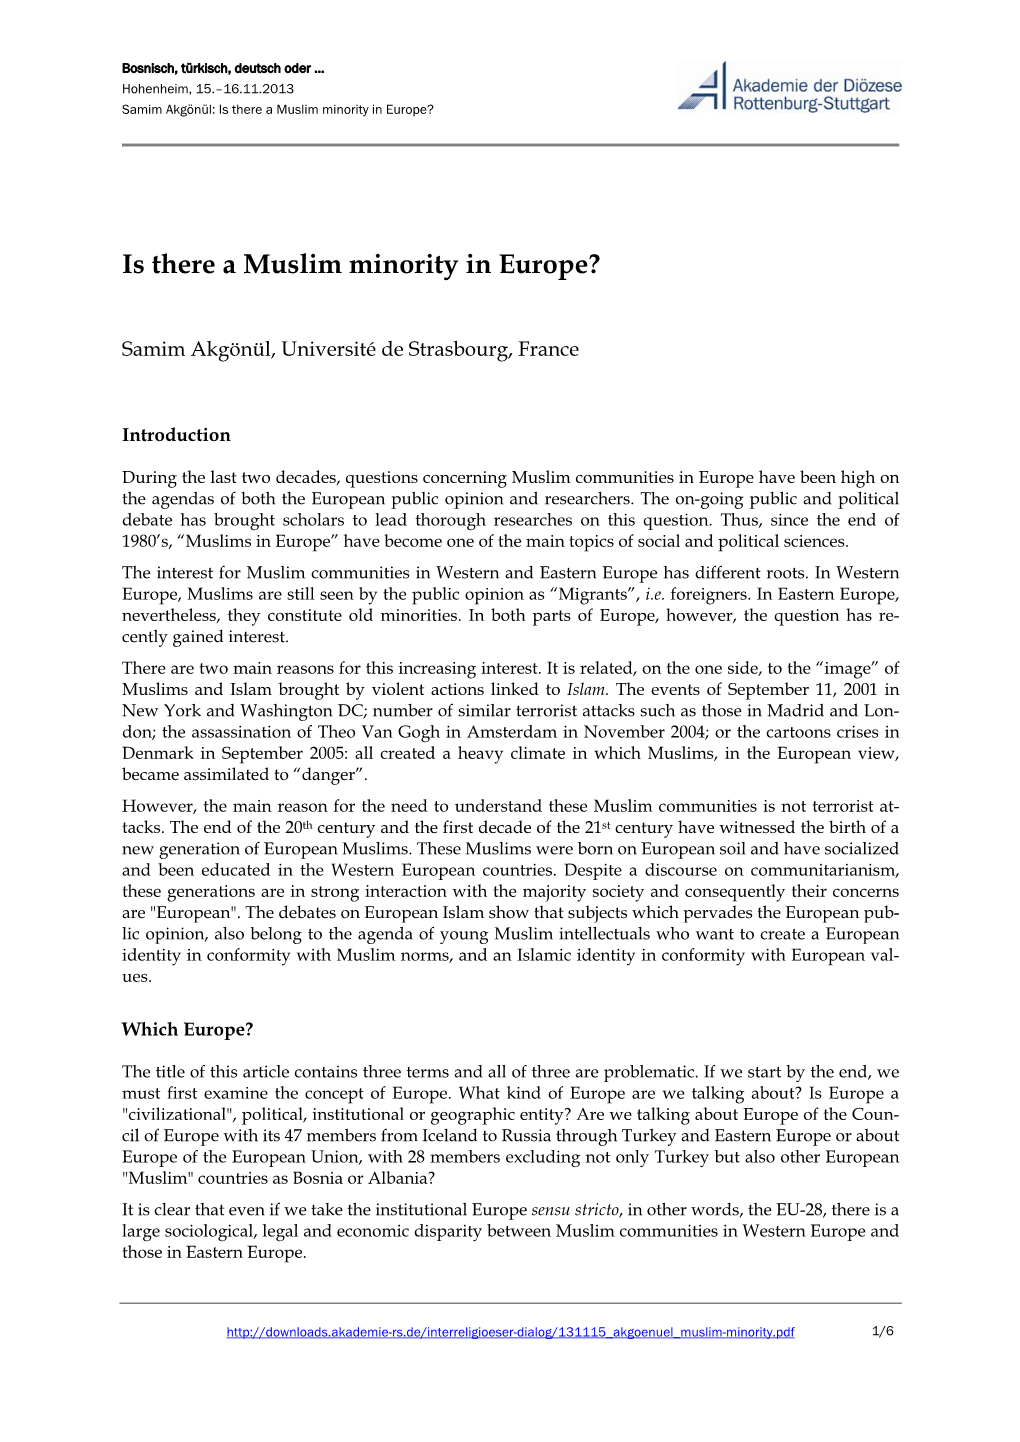 Is There a Muslim Minority in Europe?